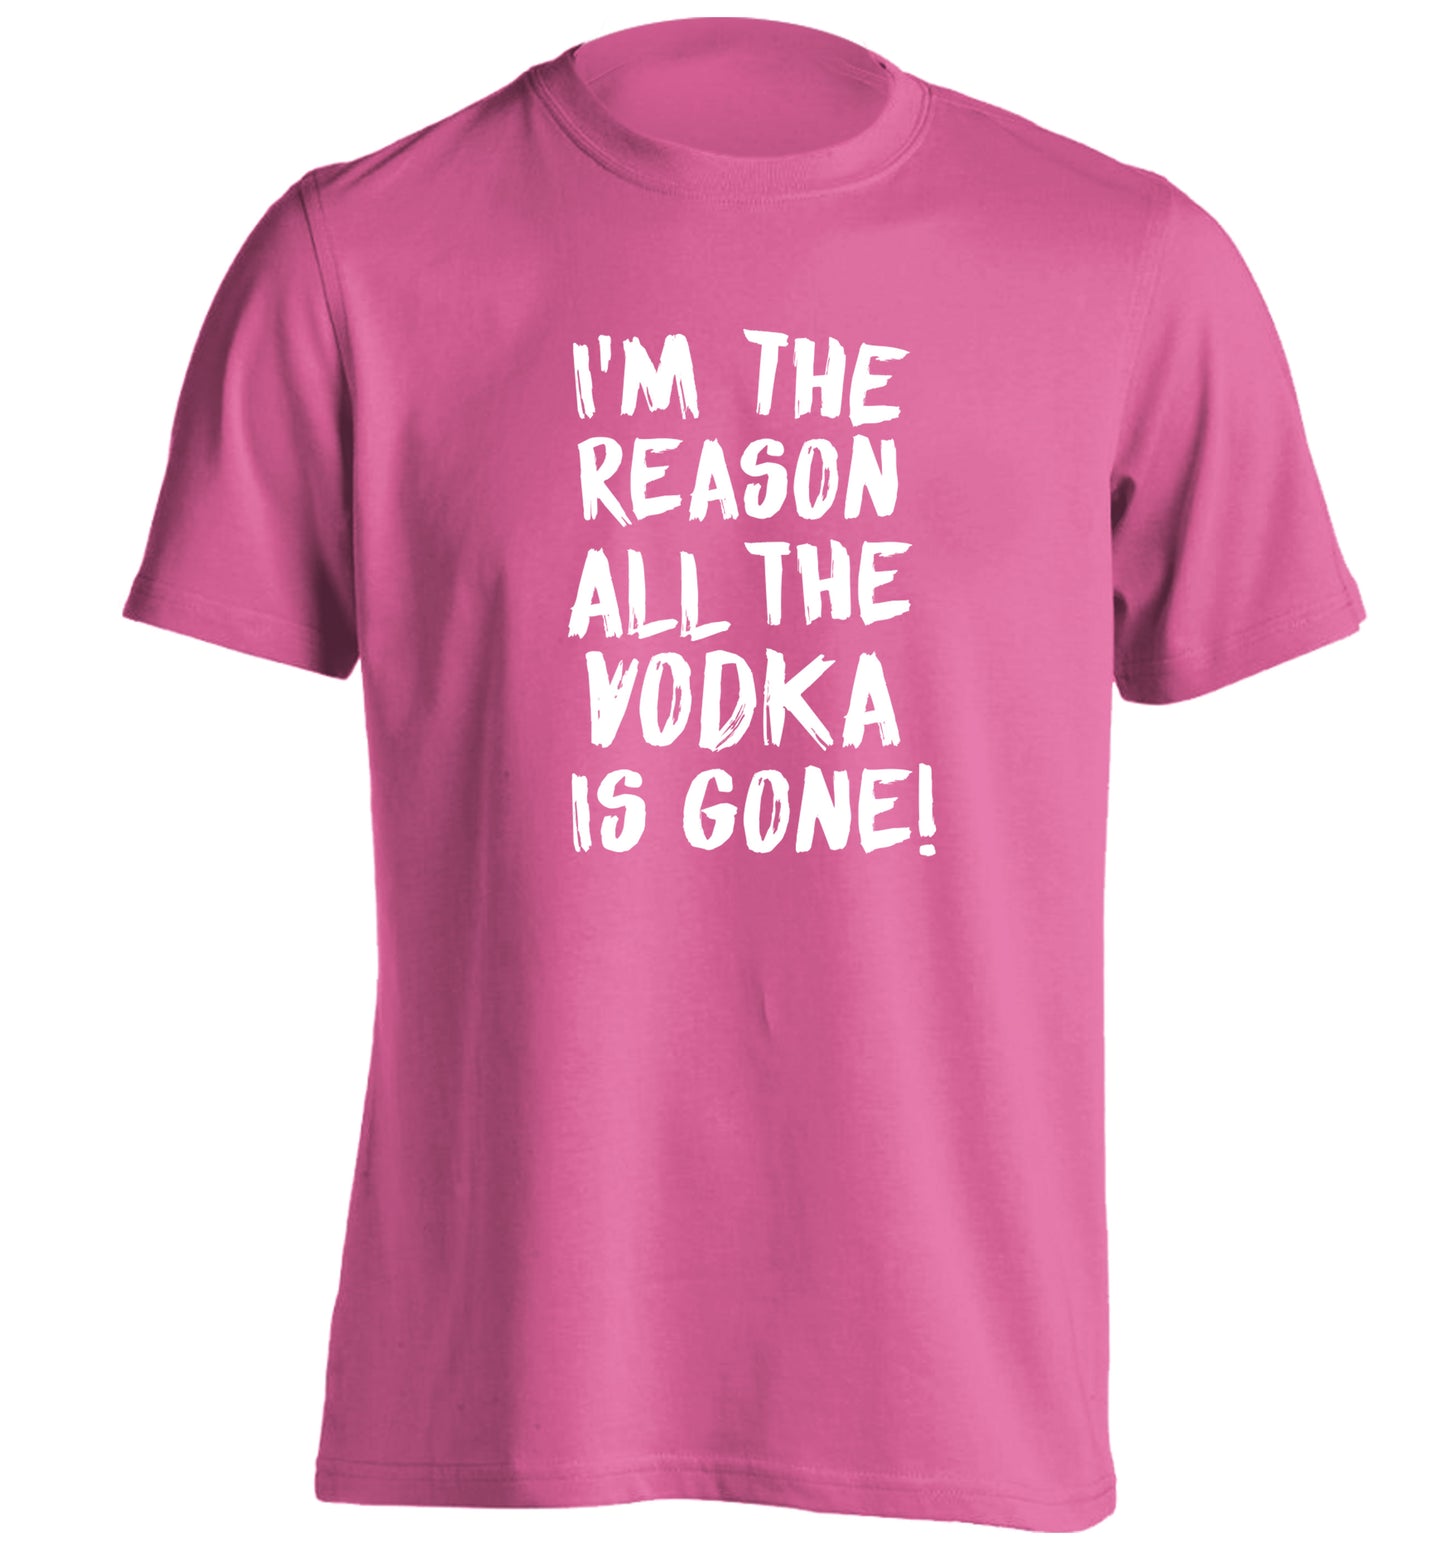 I'm the reason all the tequila is gone adults unisex pink Tshirt 2XL